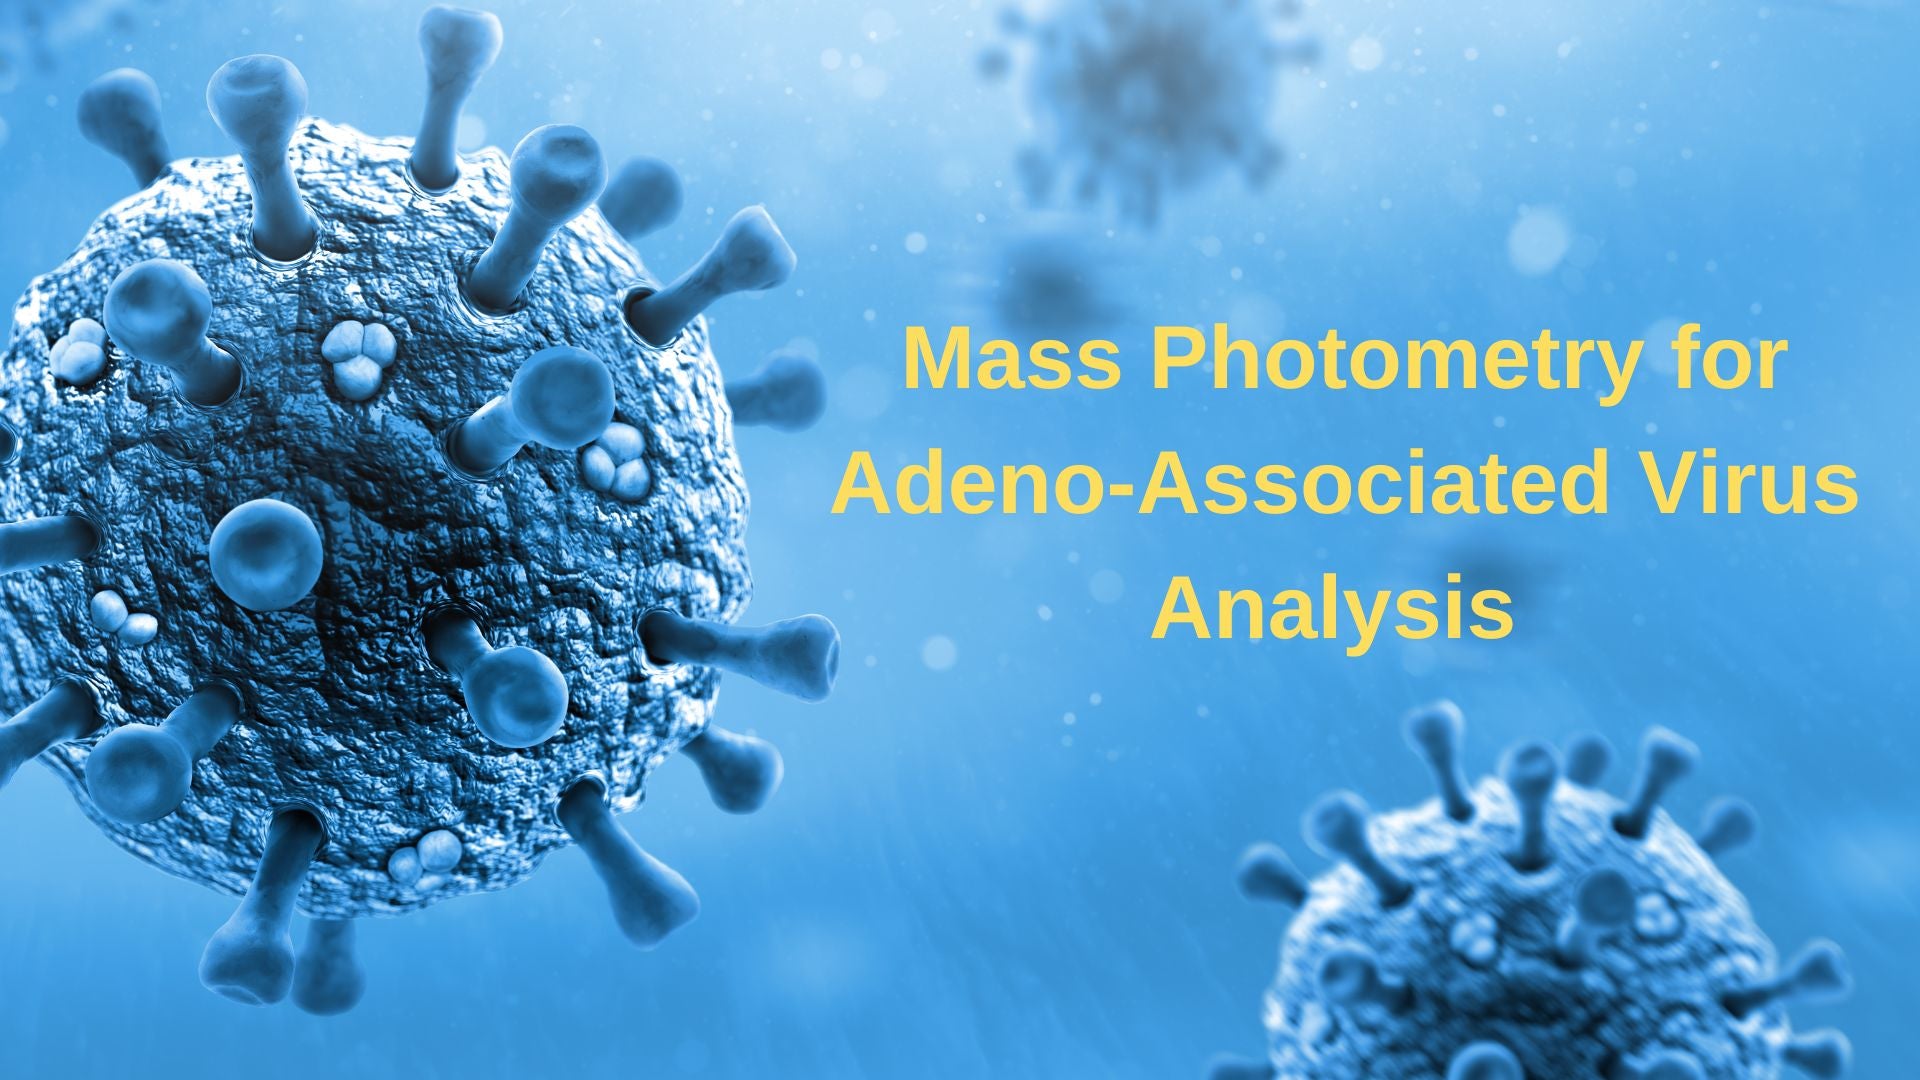 Characterization of Virus Particles and Submicron-Sized Particulate Impurities in Recombinant Adeno-Associated Virus Drug Product through Mass Photometry